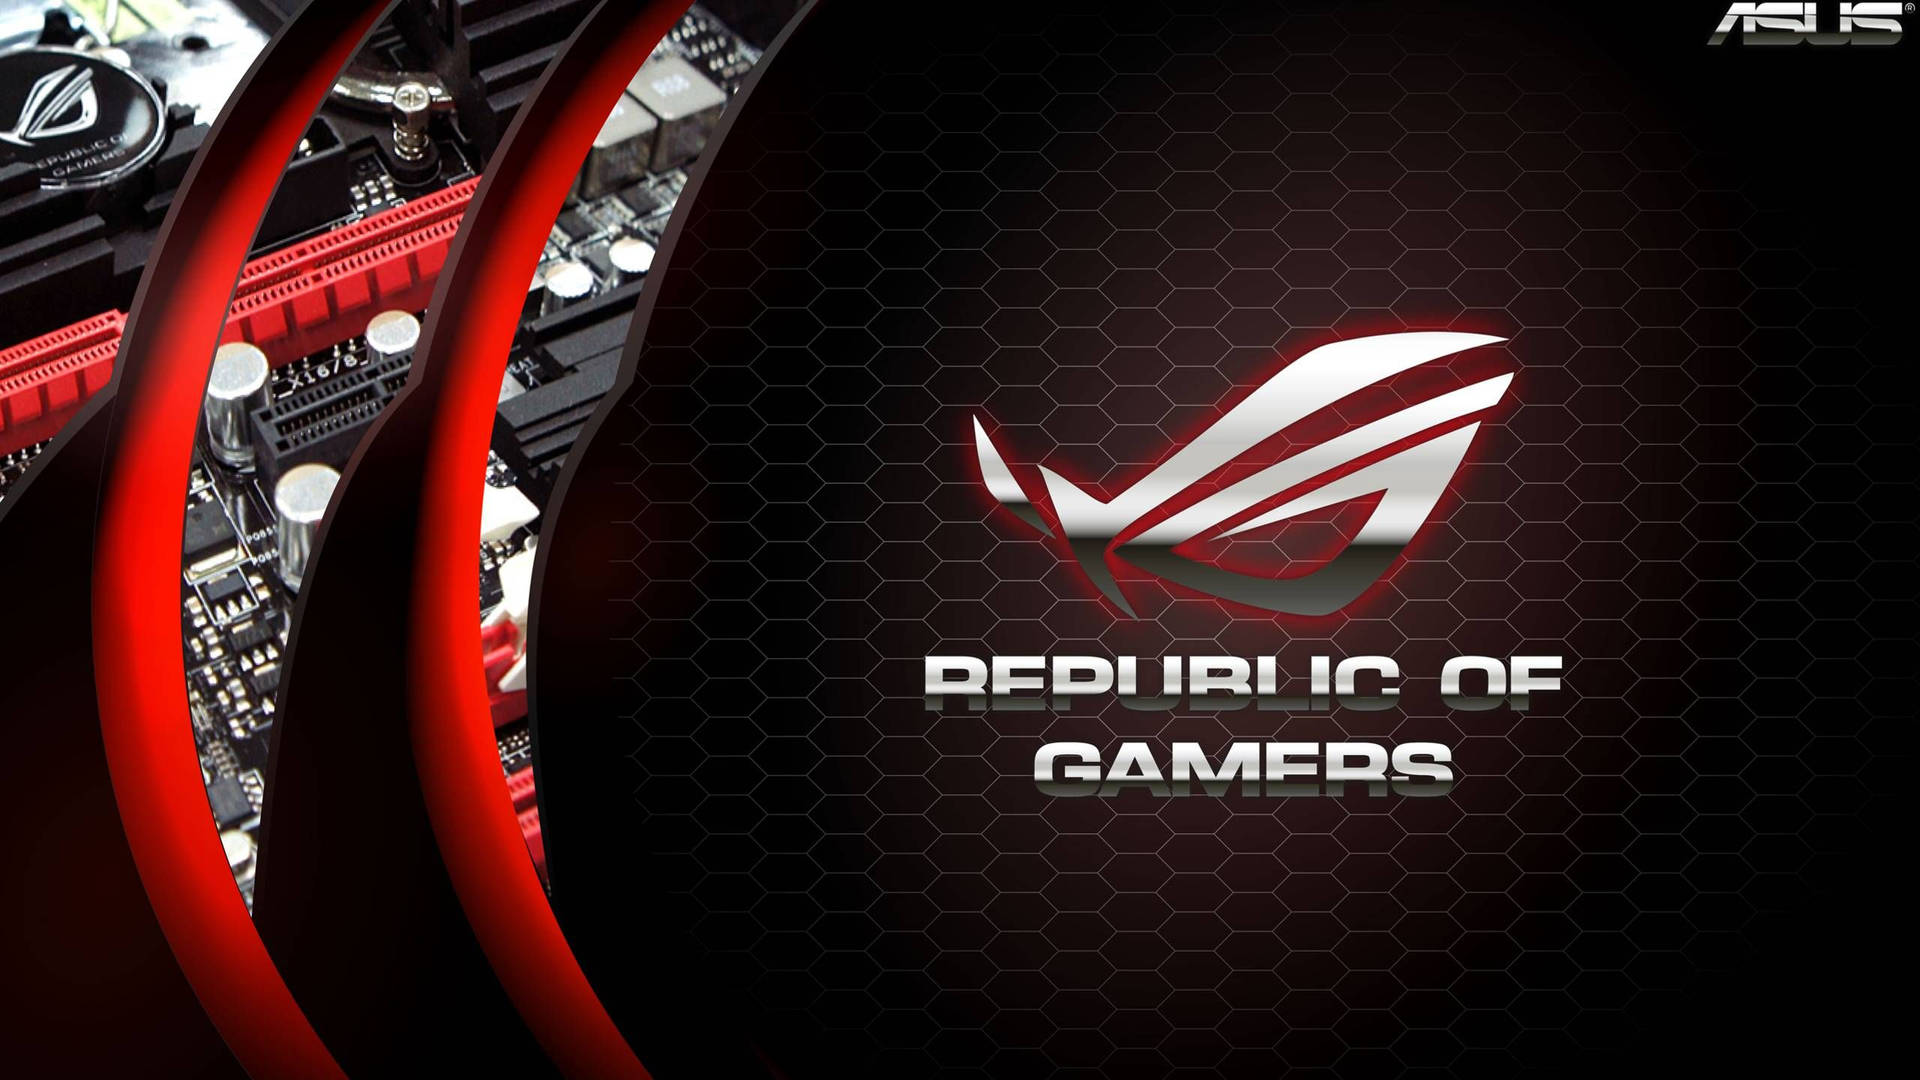 Processor Unleashed: Get Ready for Some Serious Gaming with Asus ROG Wallpaper